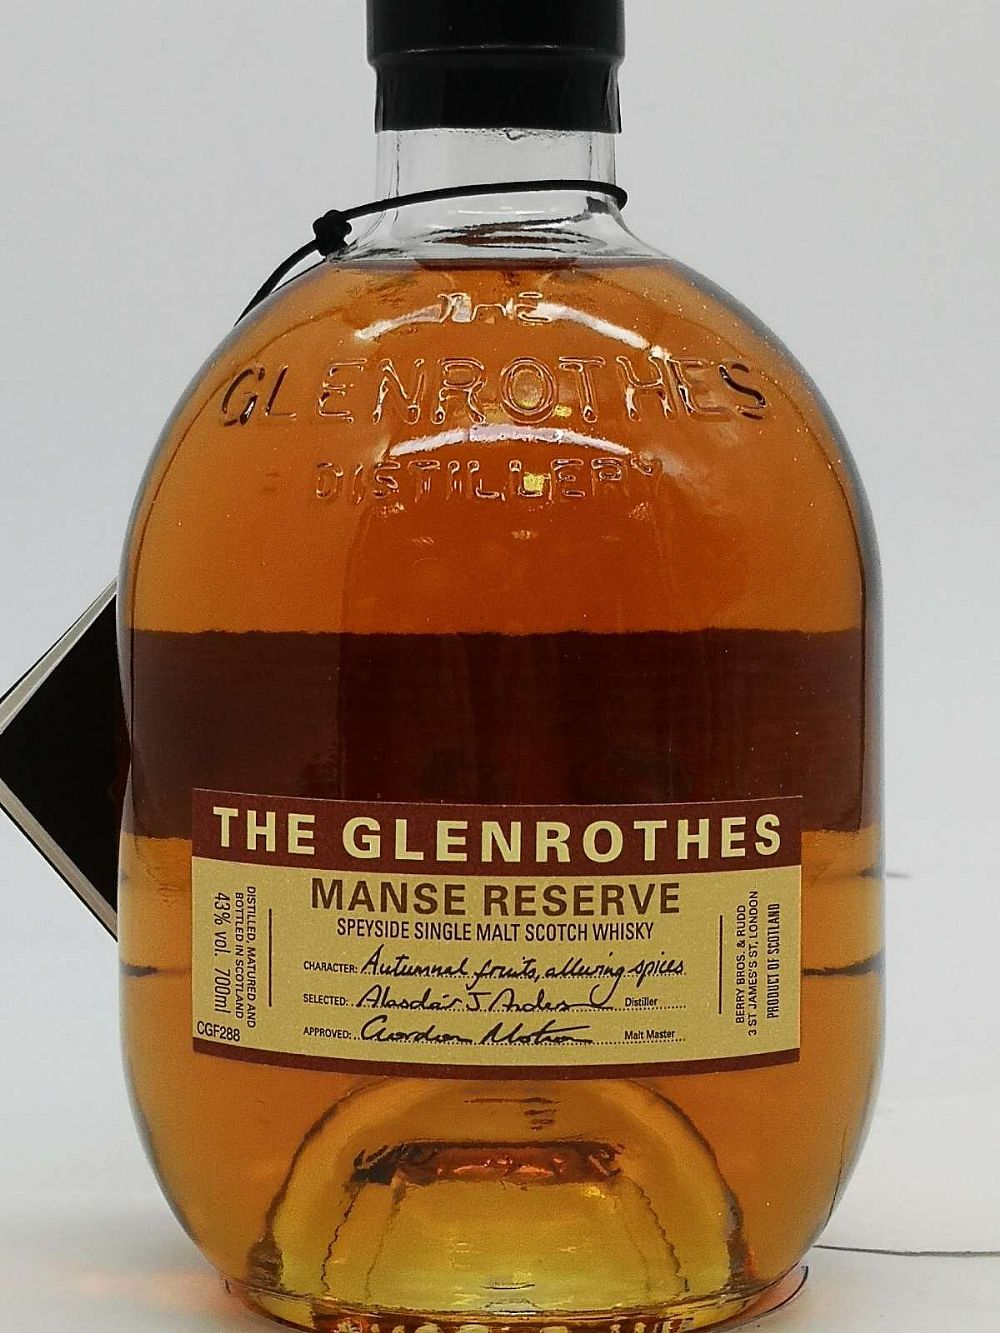 The Glenrothes Manse Reserve